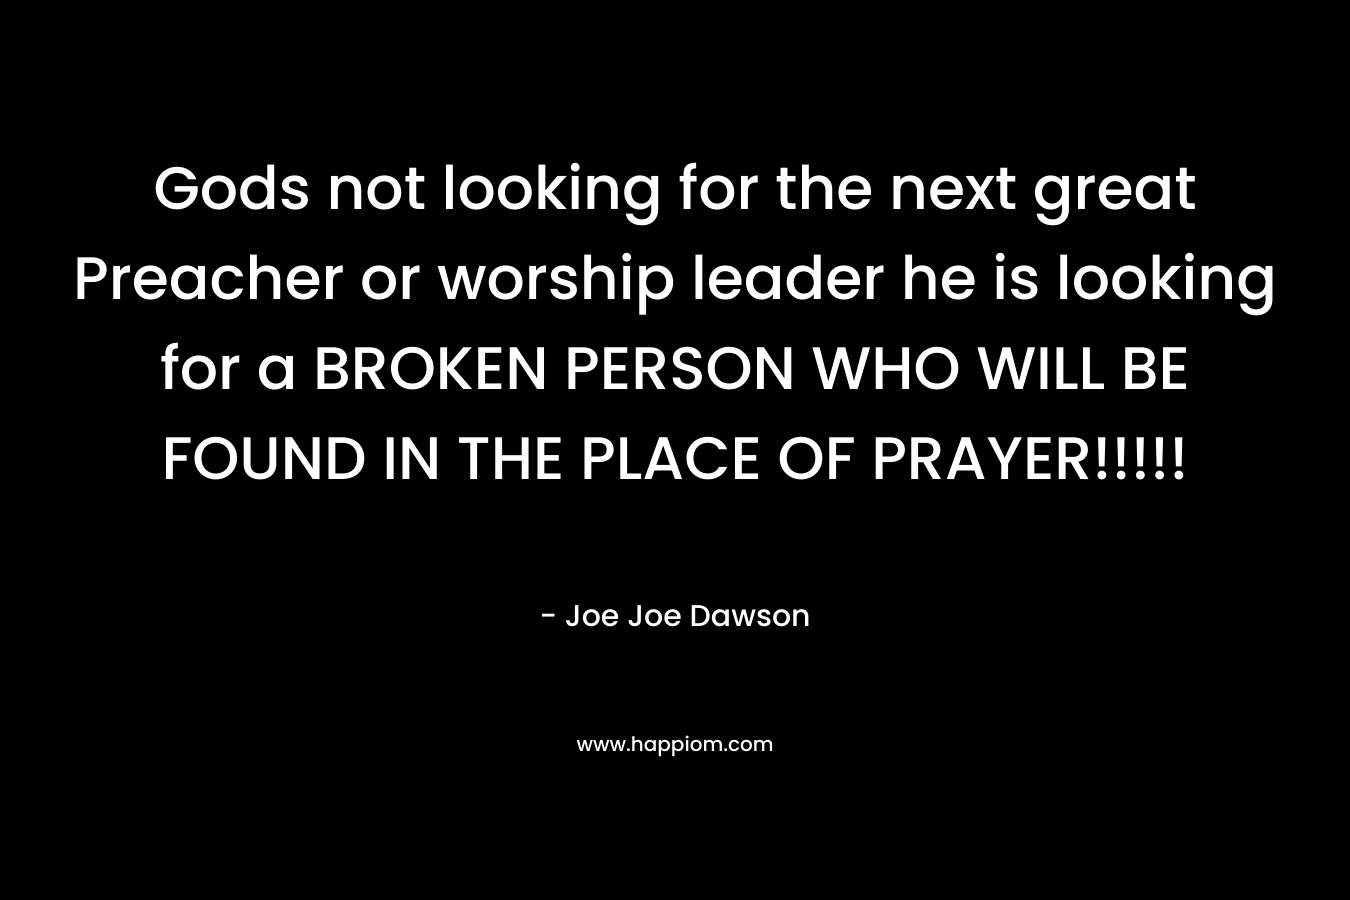 Gods not looking for the next great Preacher or worship leader he is looking for a BROKEN PERSON WHO WILL BE FOUND IN THE PLACE OF PRAYER!!!!!